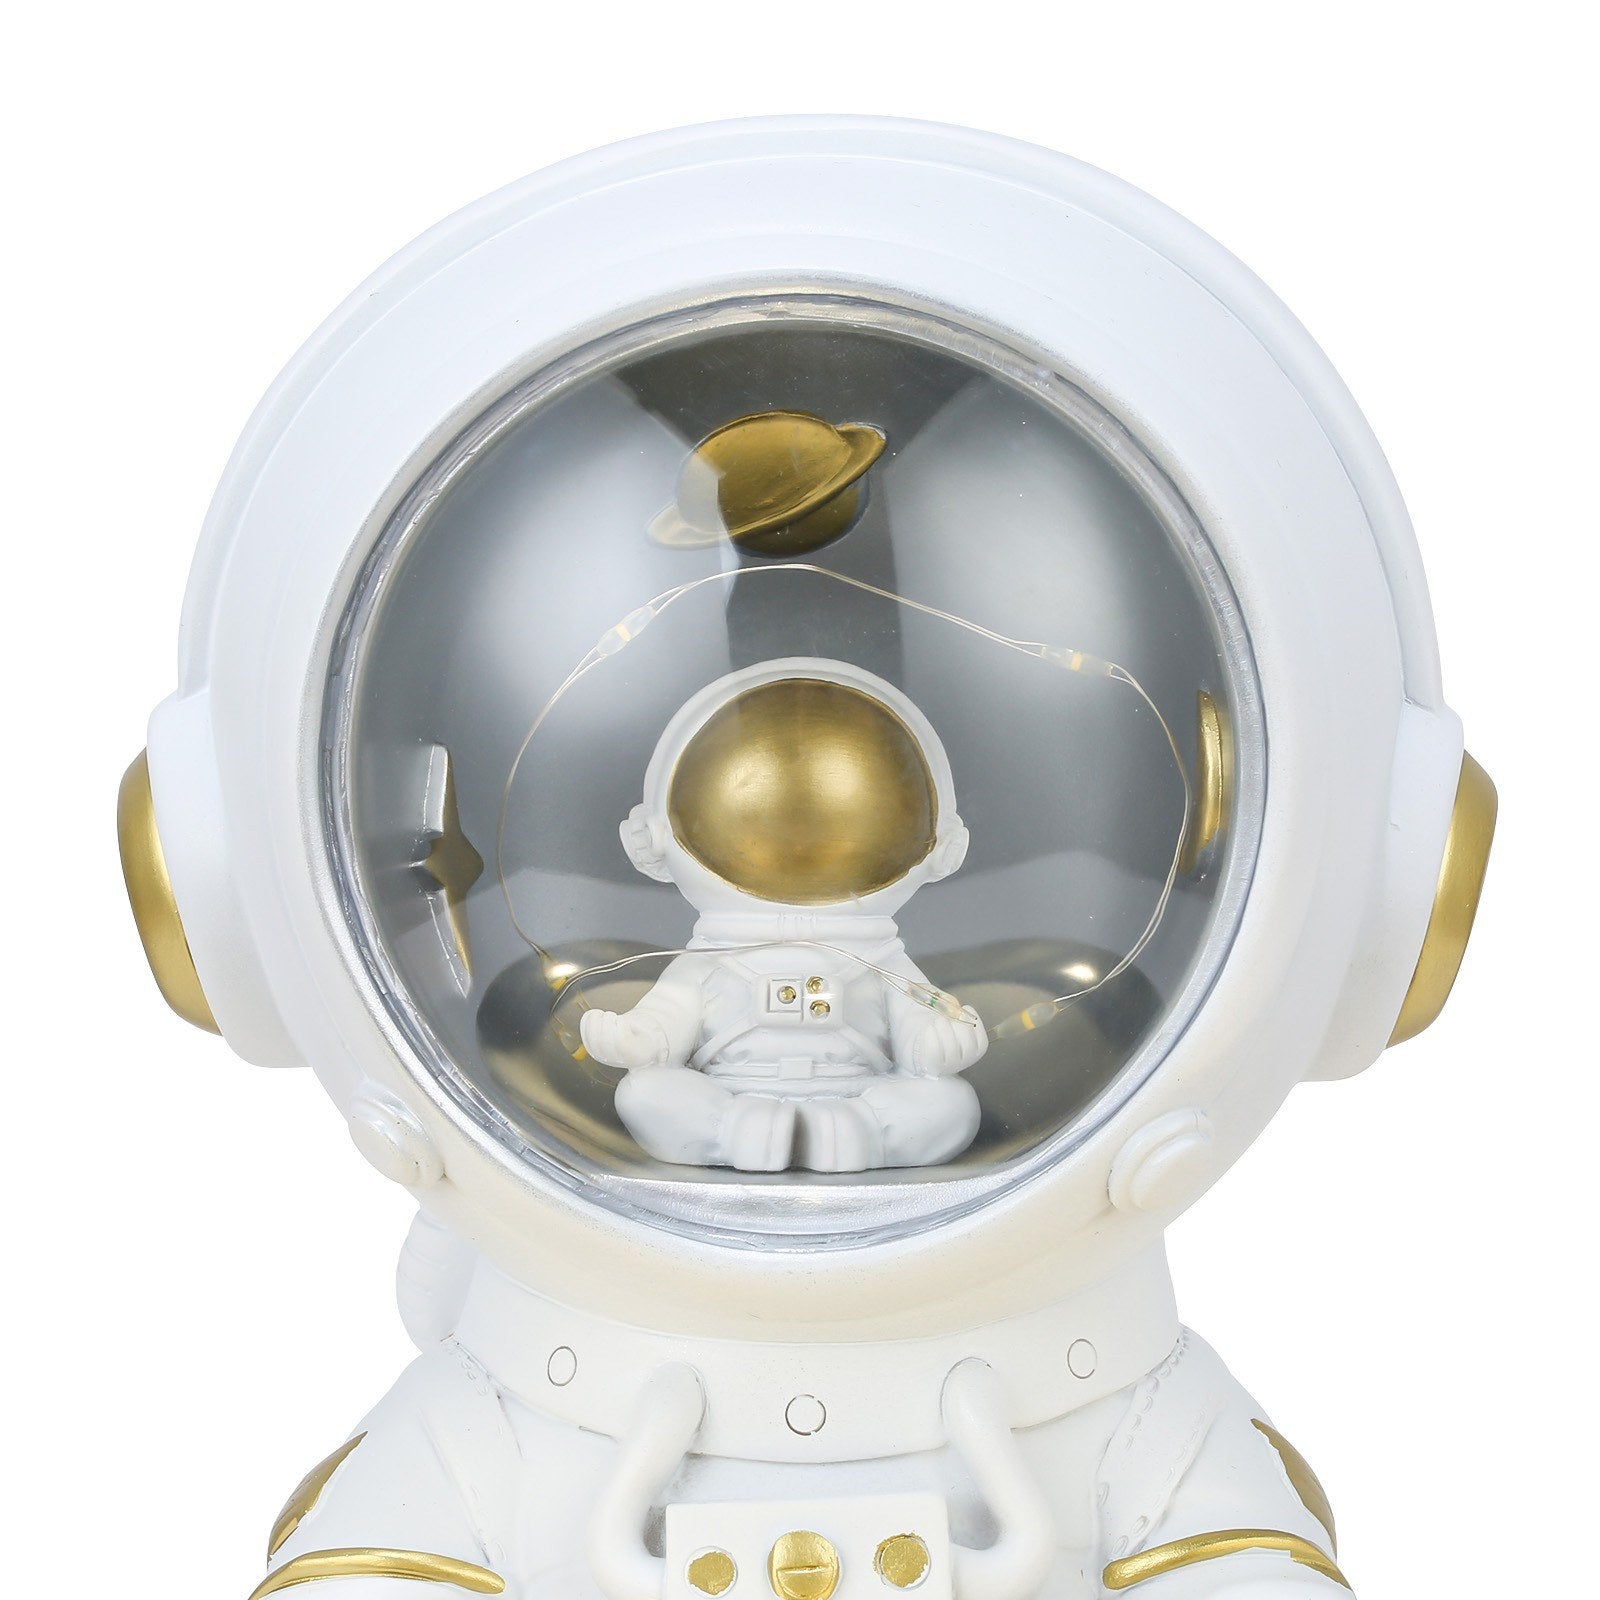 Astronaut figurine is a must-have for those who love the stars, cosmos